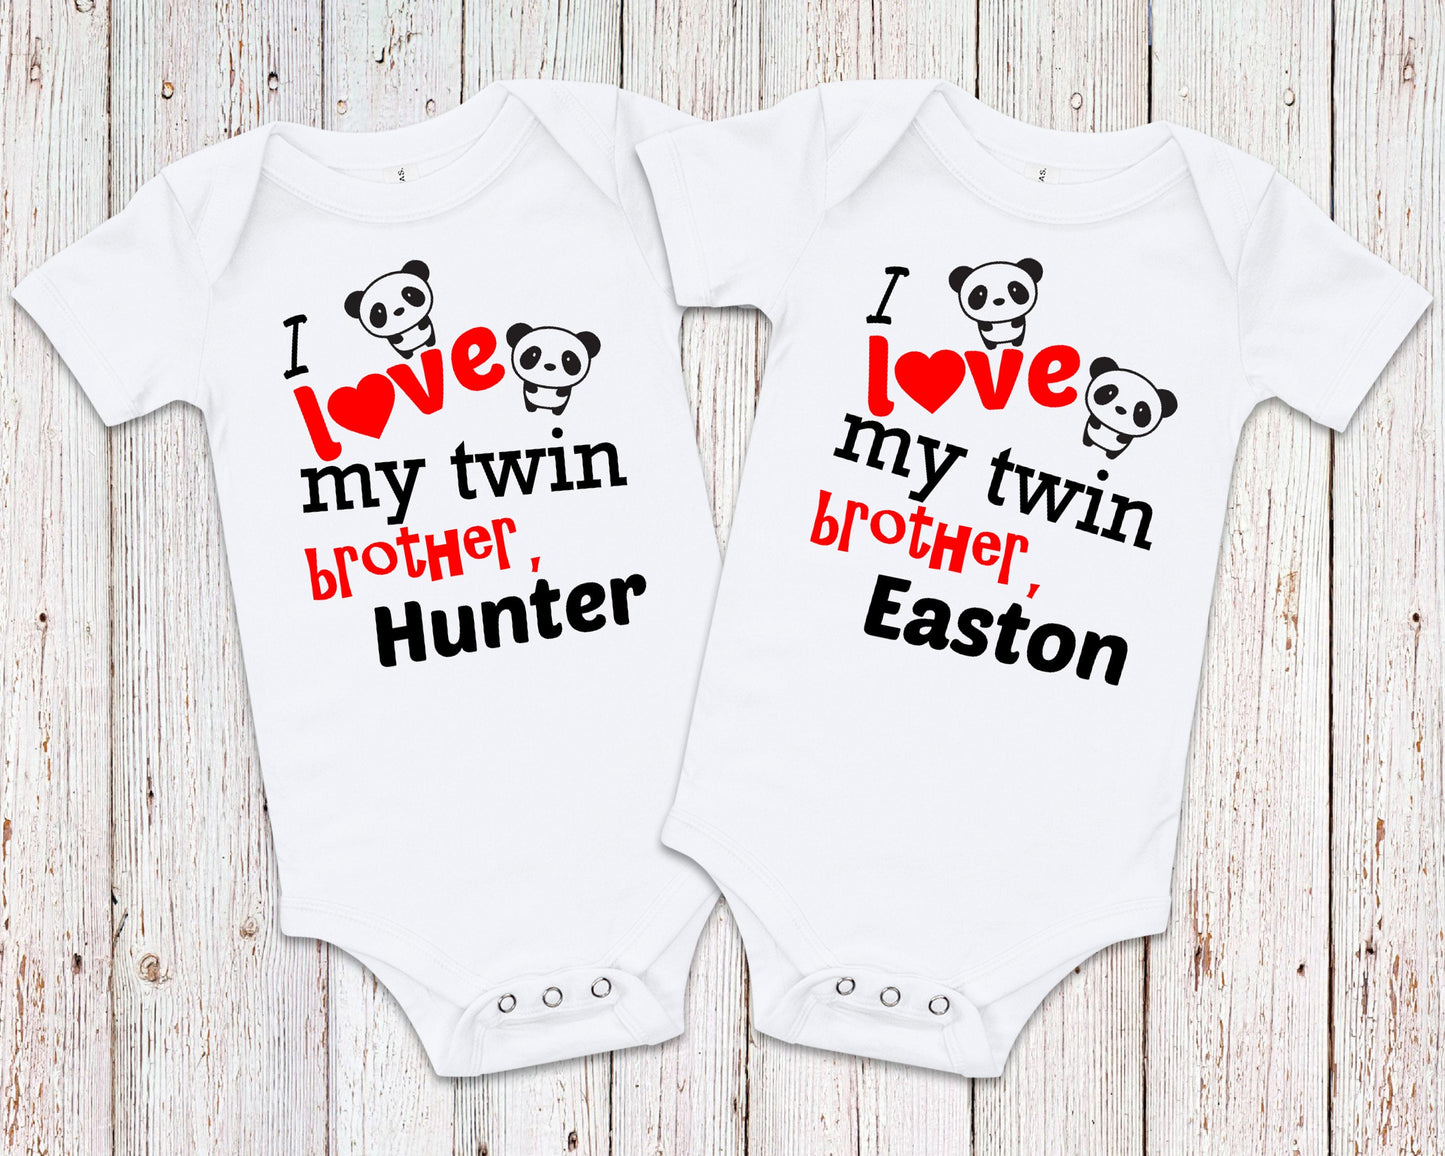 I Love My Twin Brother Twins T-Shirts or Bodysuits for Twin Boys - Identical Twins - Fraternal Twins - Brother Tees - boy twin tees